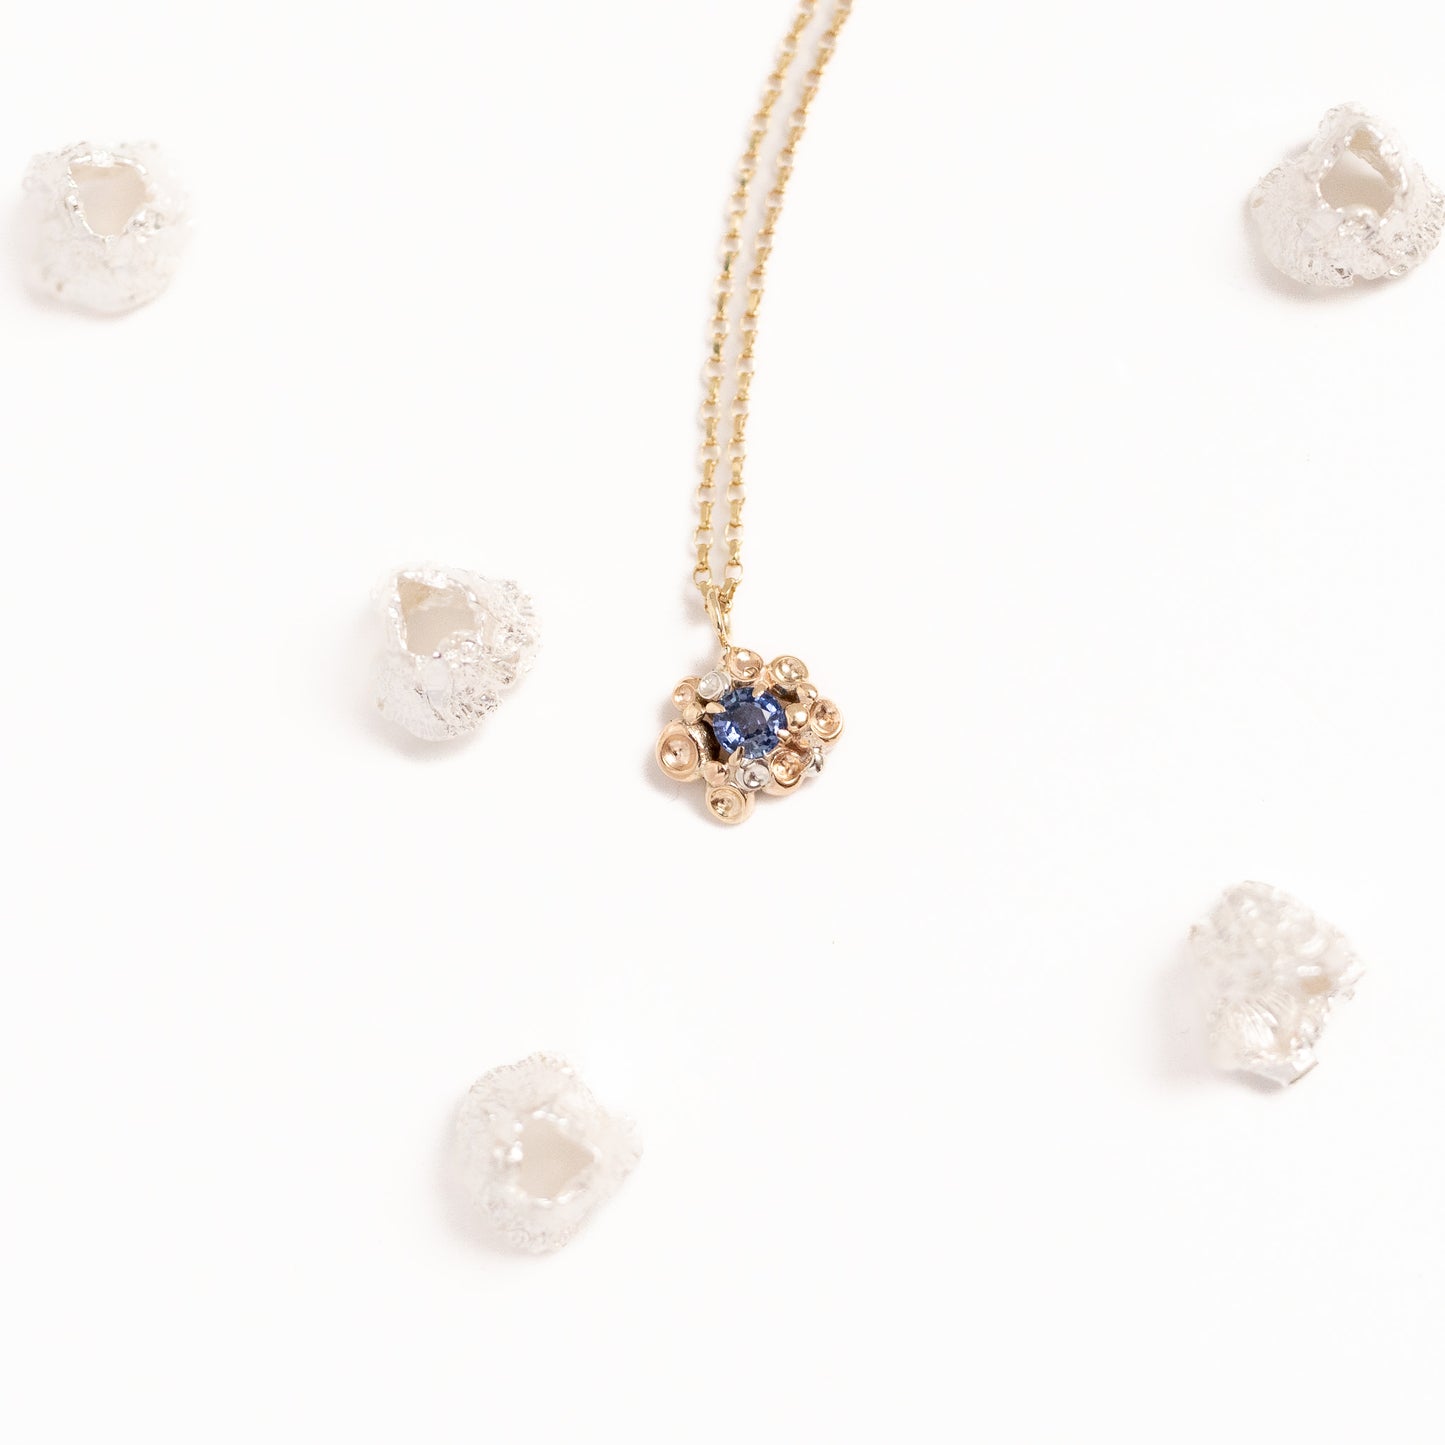 Barnacle Gold Pendant Necklace with Sapphire